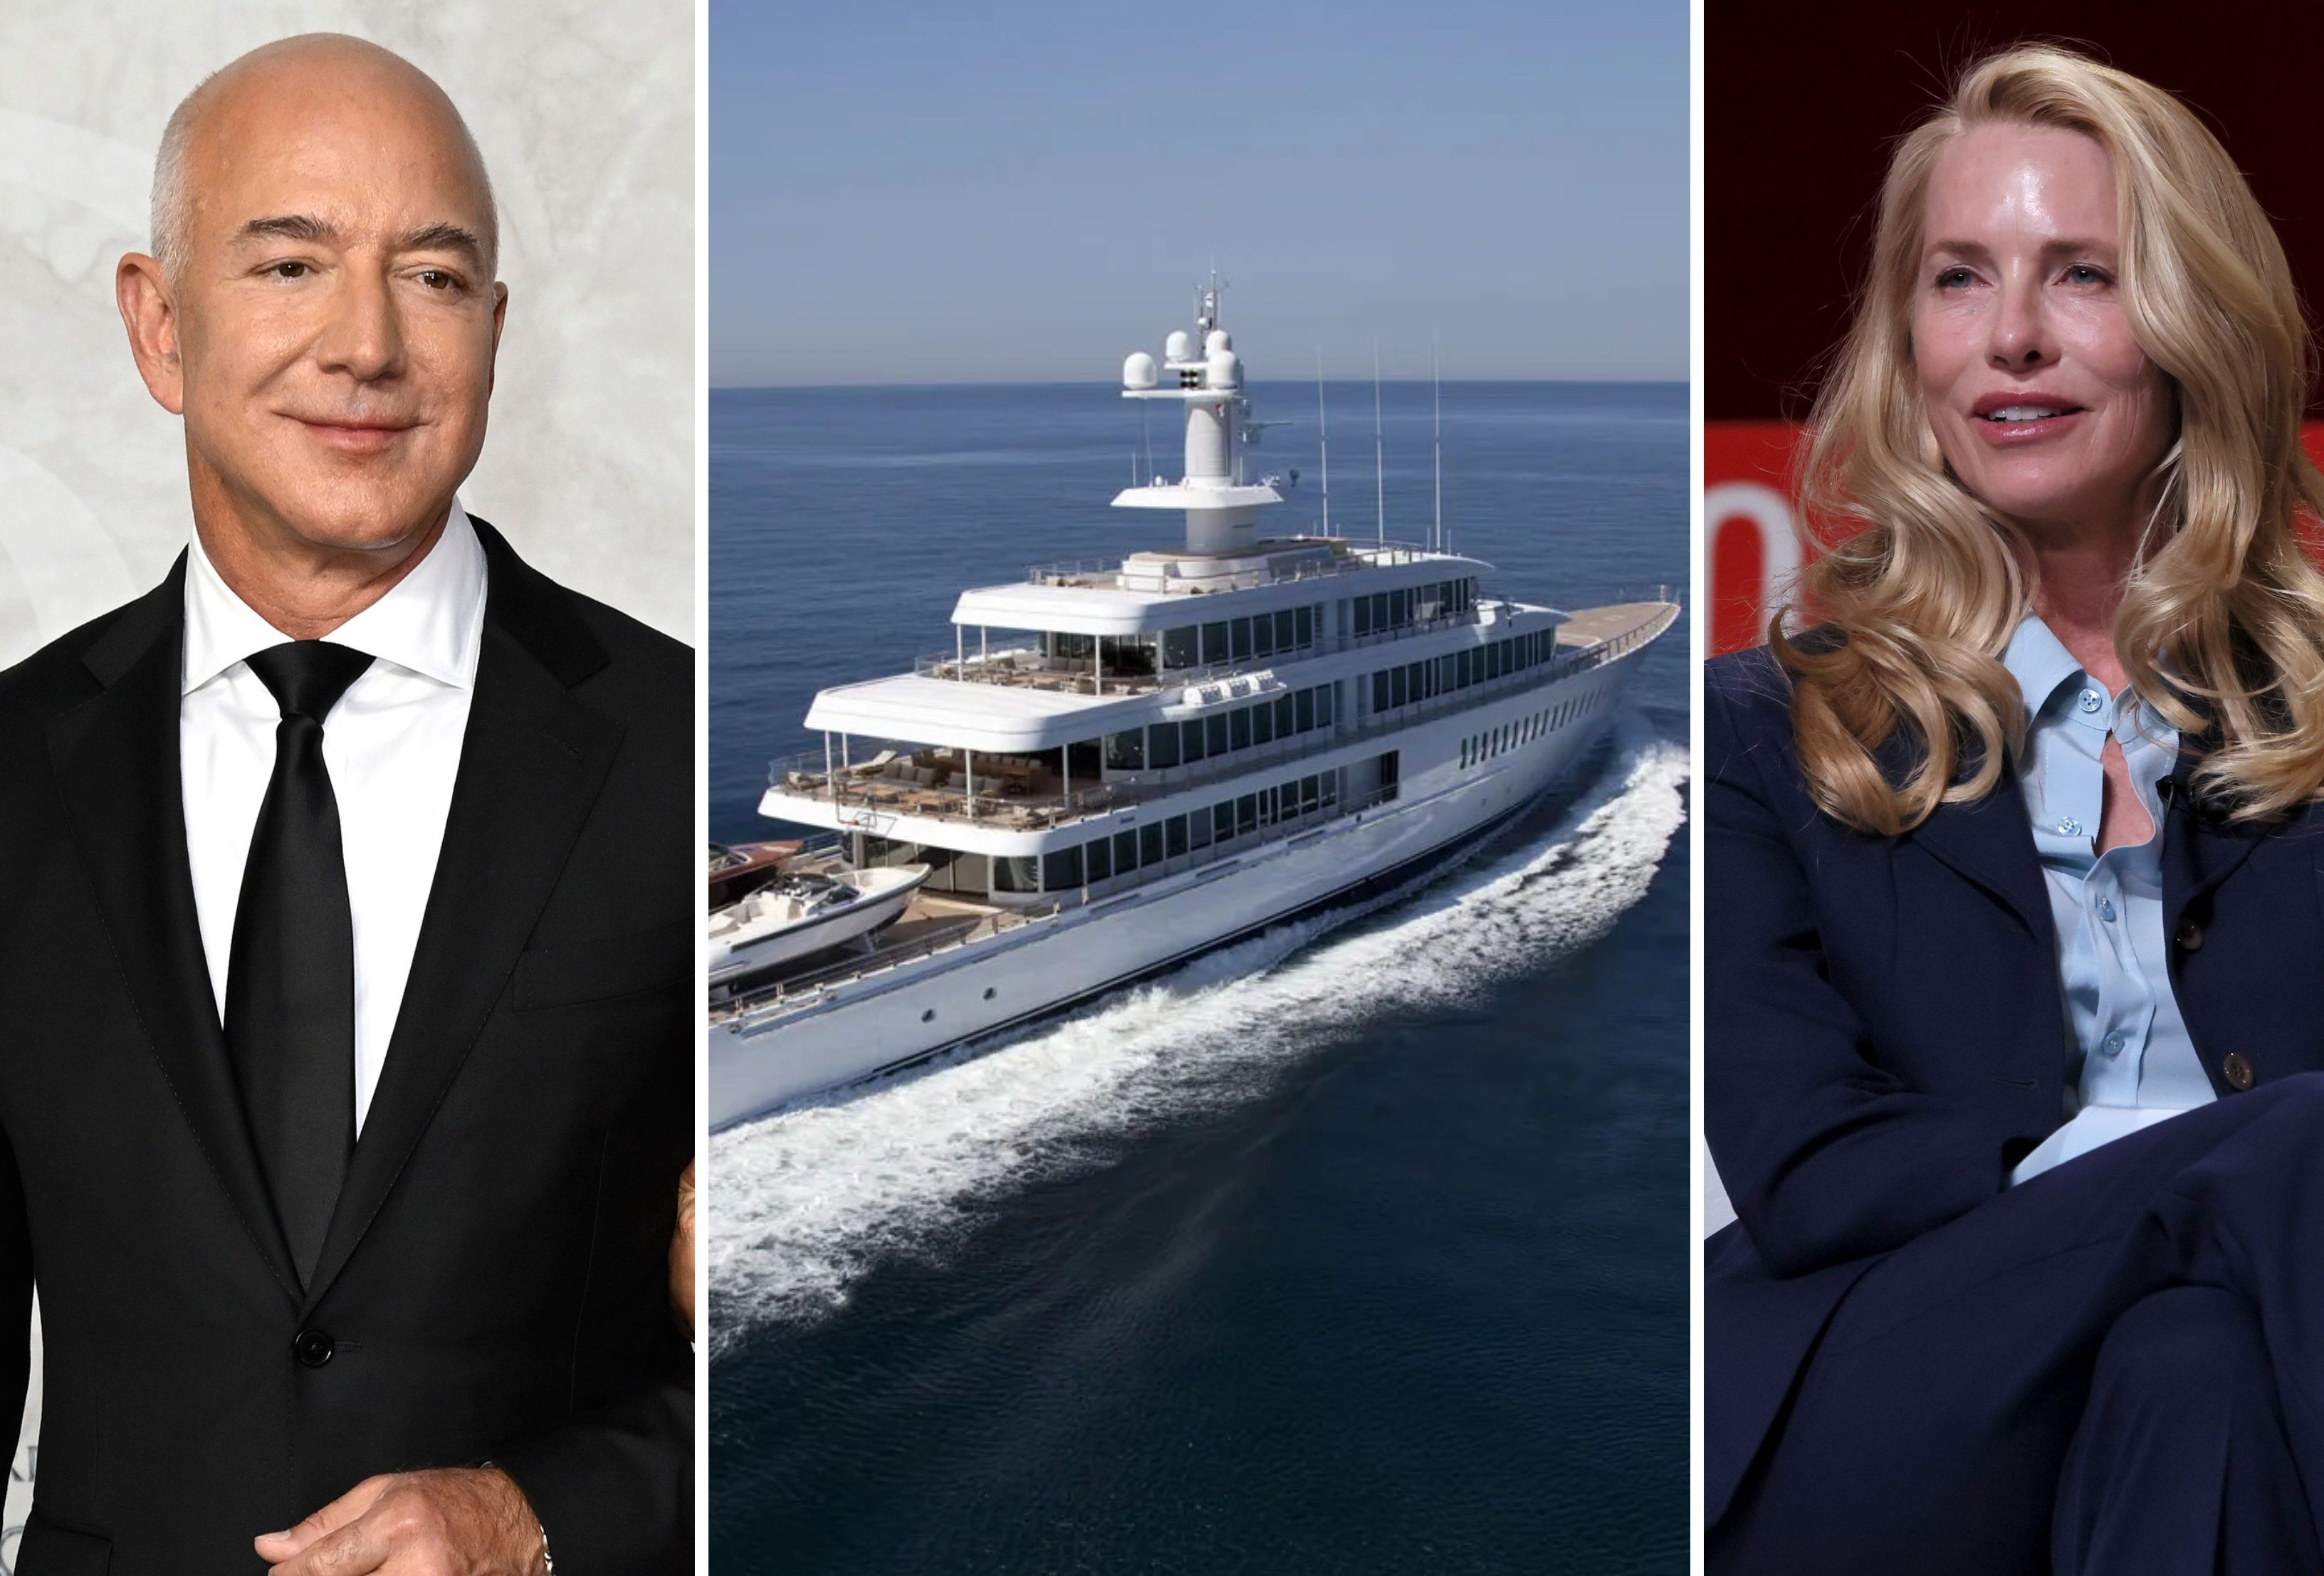 Jeff Bezos and Laurene Powell Jobs are among the tech CEOs who own some truly impressive superyachts. Photos: TNS, Getty Images, Boat International